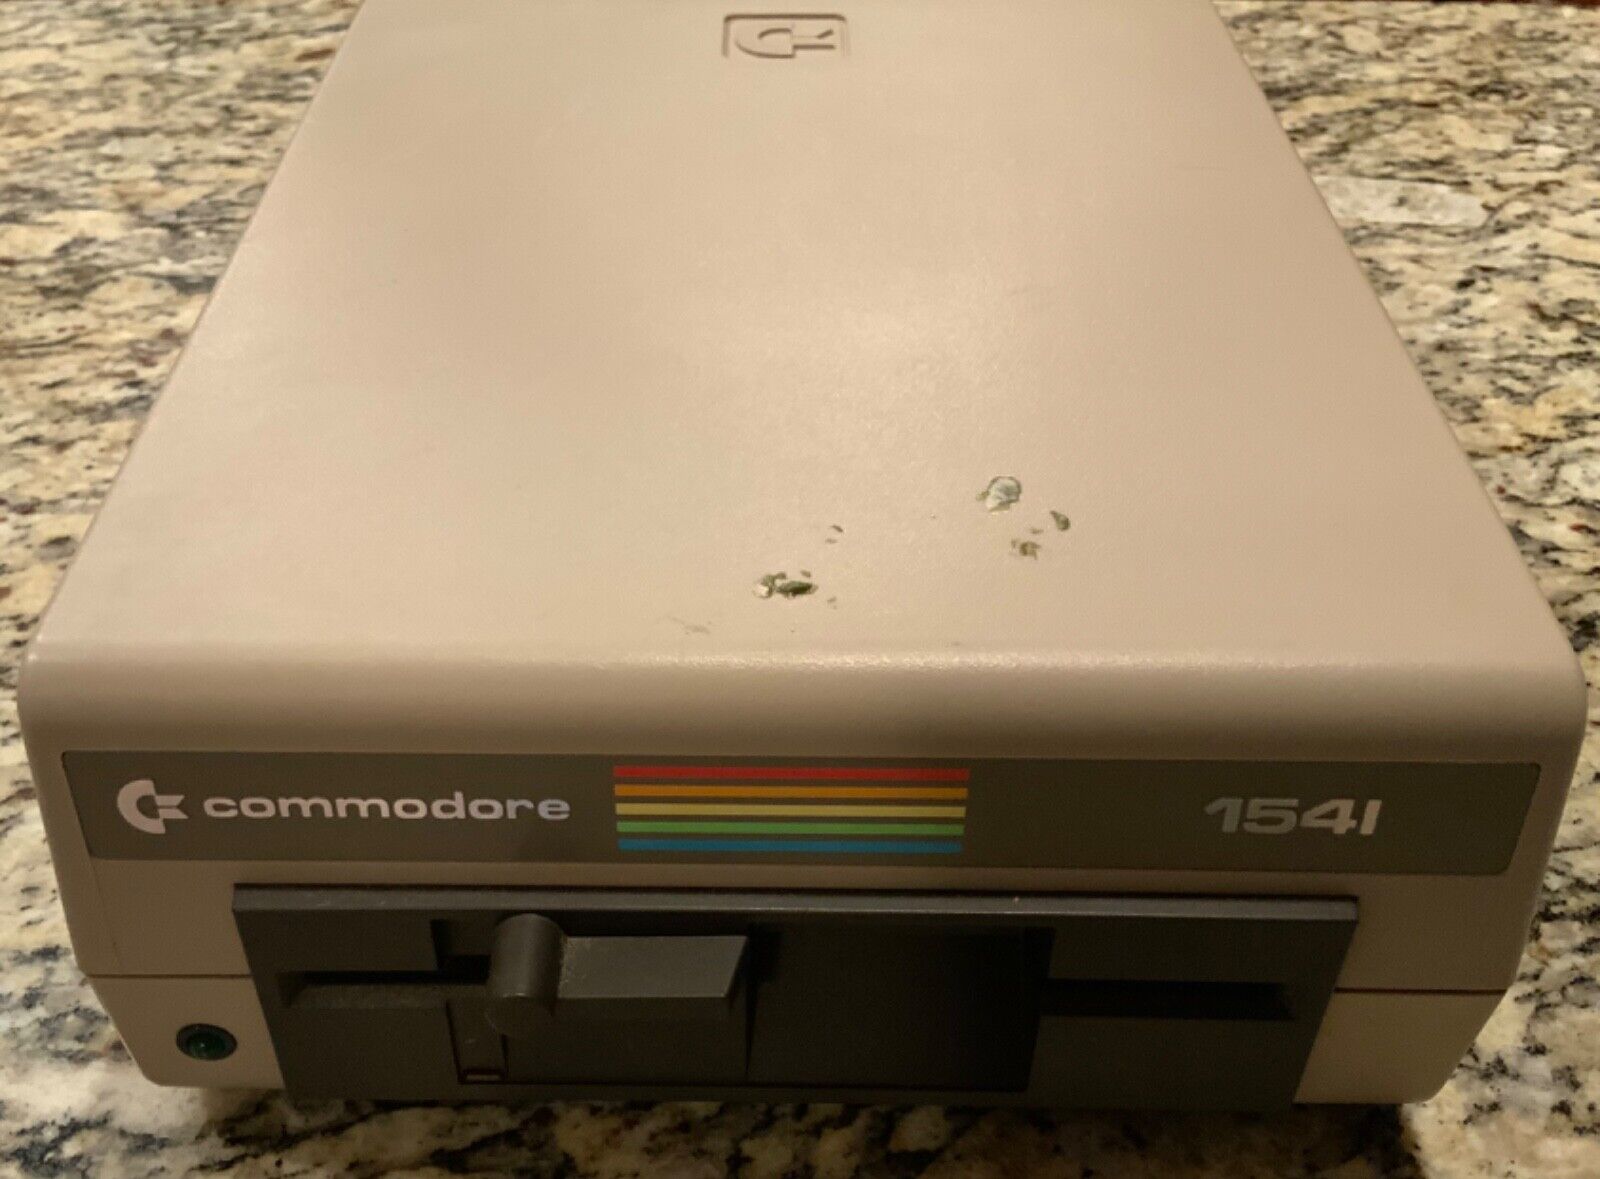 Vtg Commodore Model 1541 Single Drive Floppy Disk Drive Untested Made in Japan